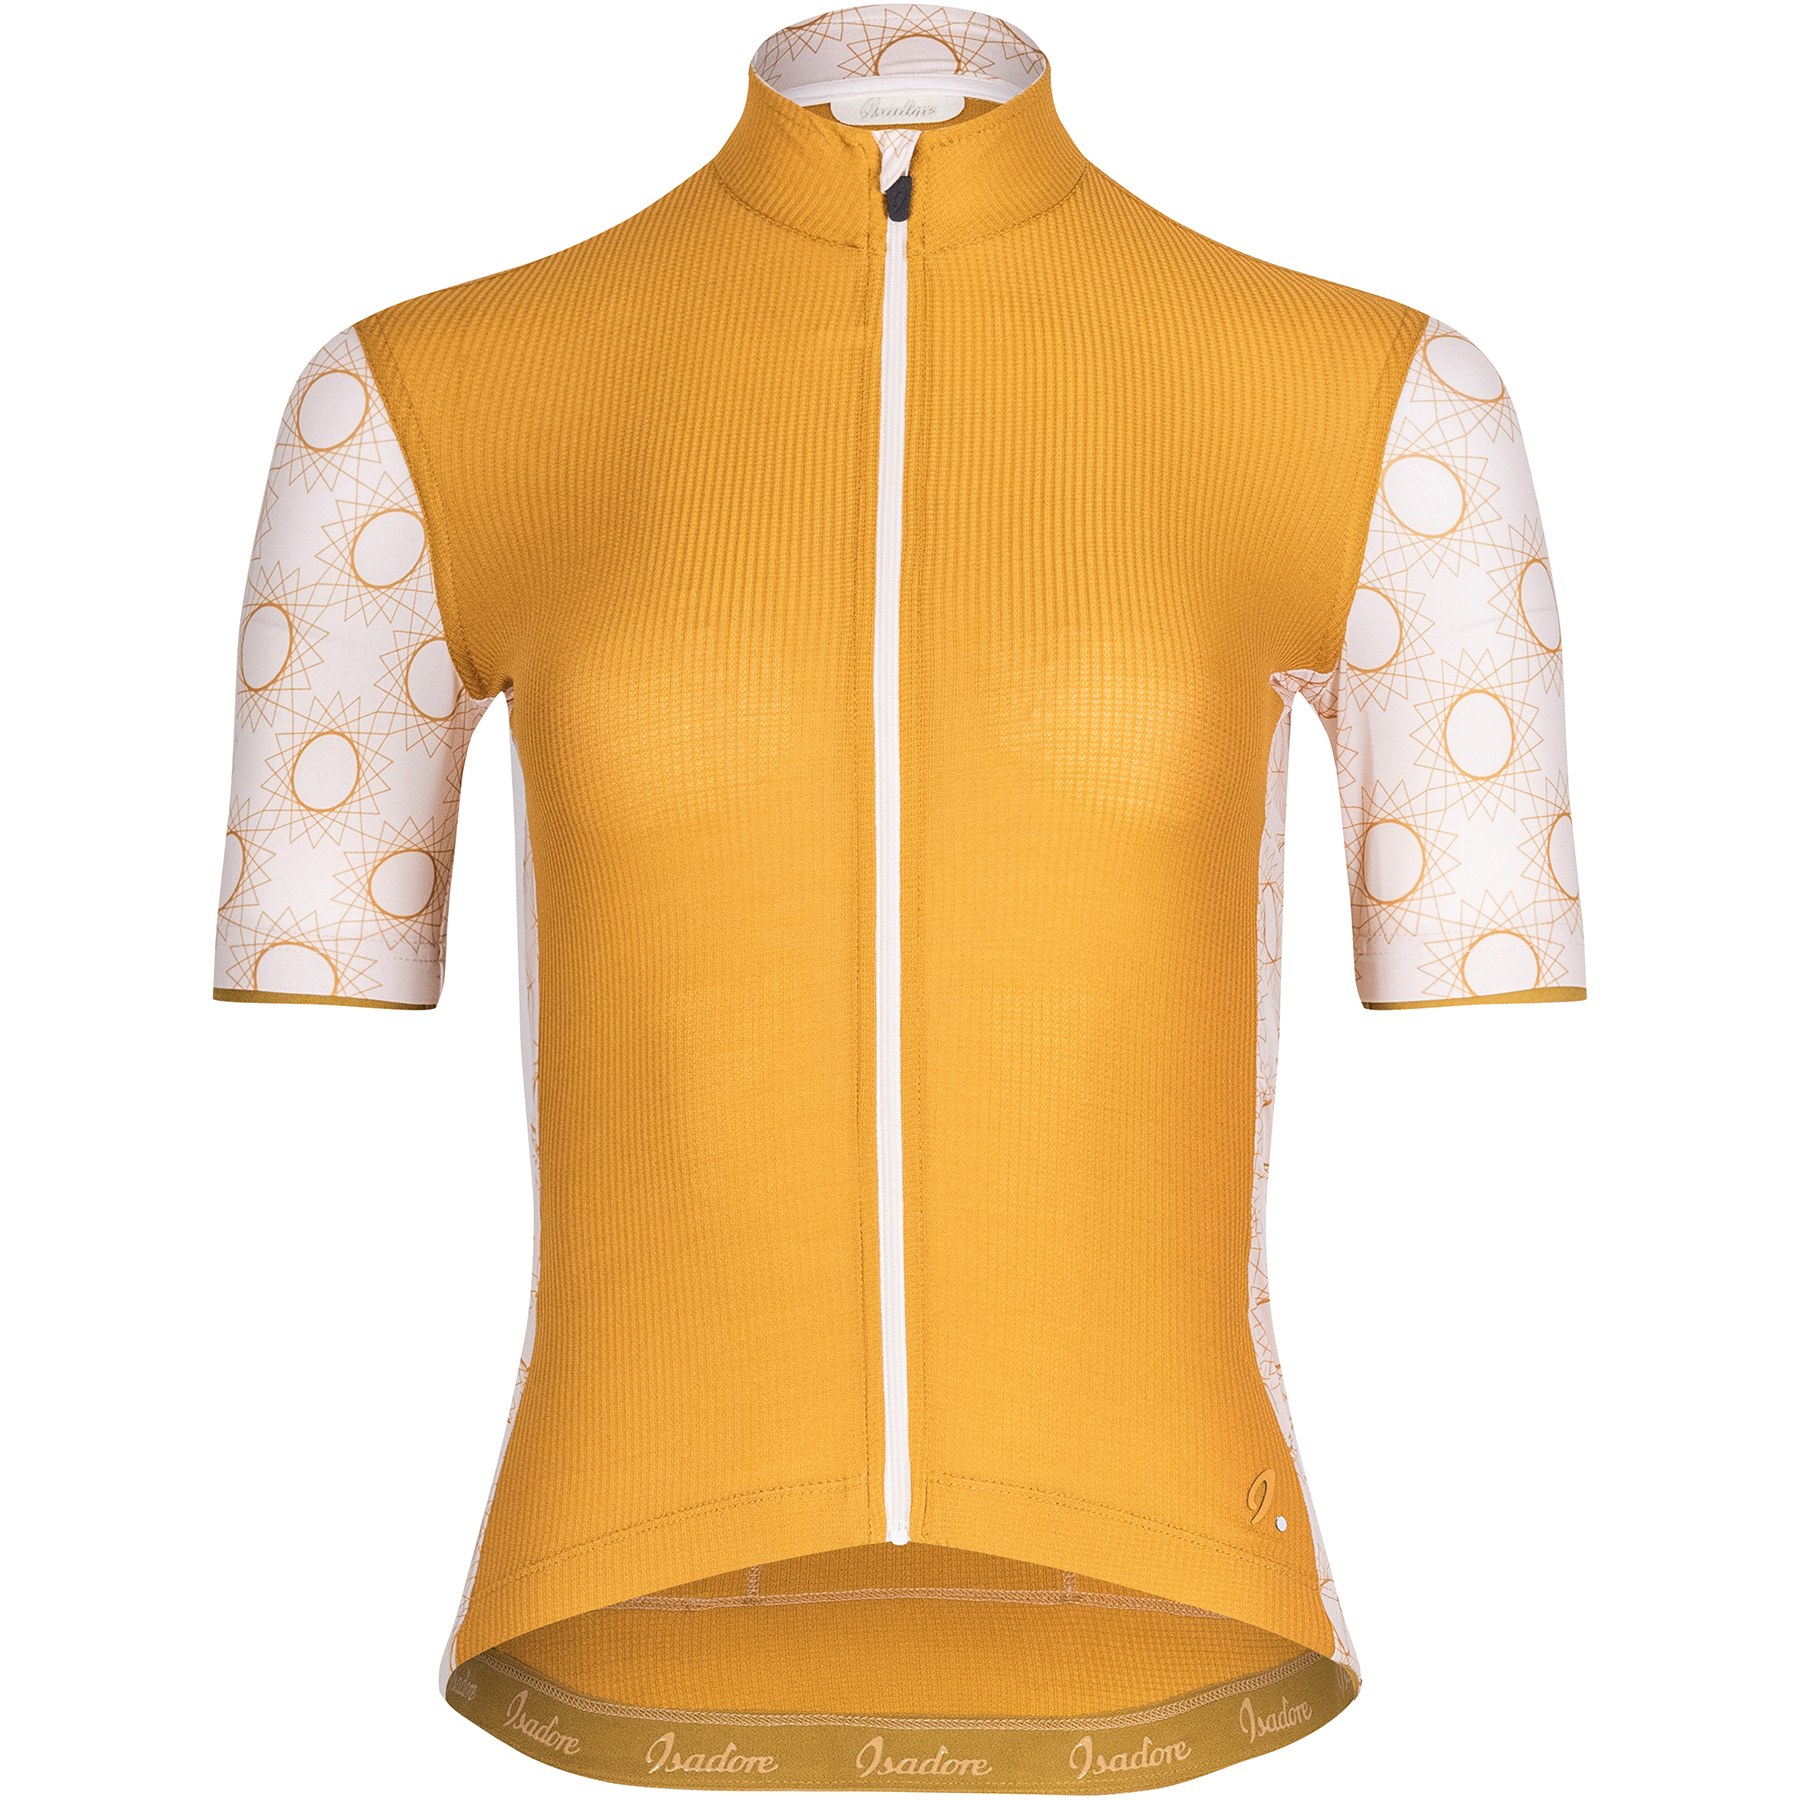 Image of Isadore Signature Climbers Women's Jersey - Tuscany